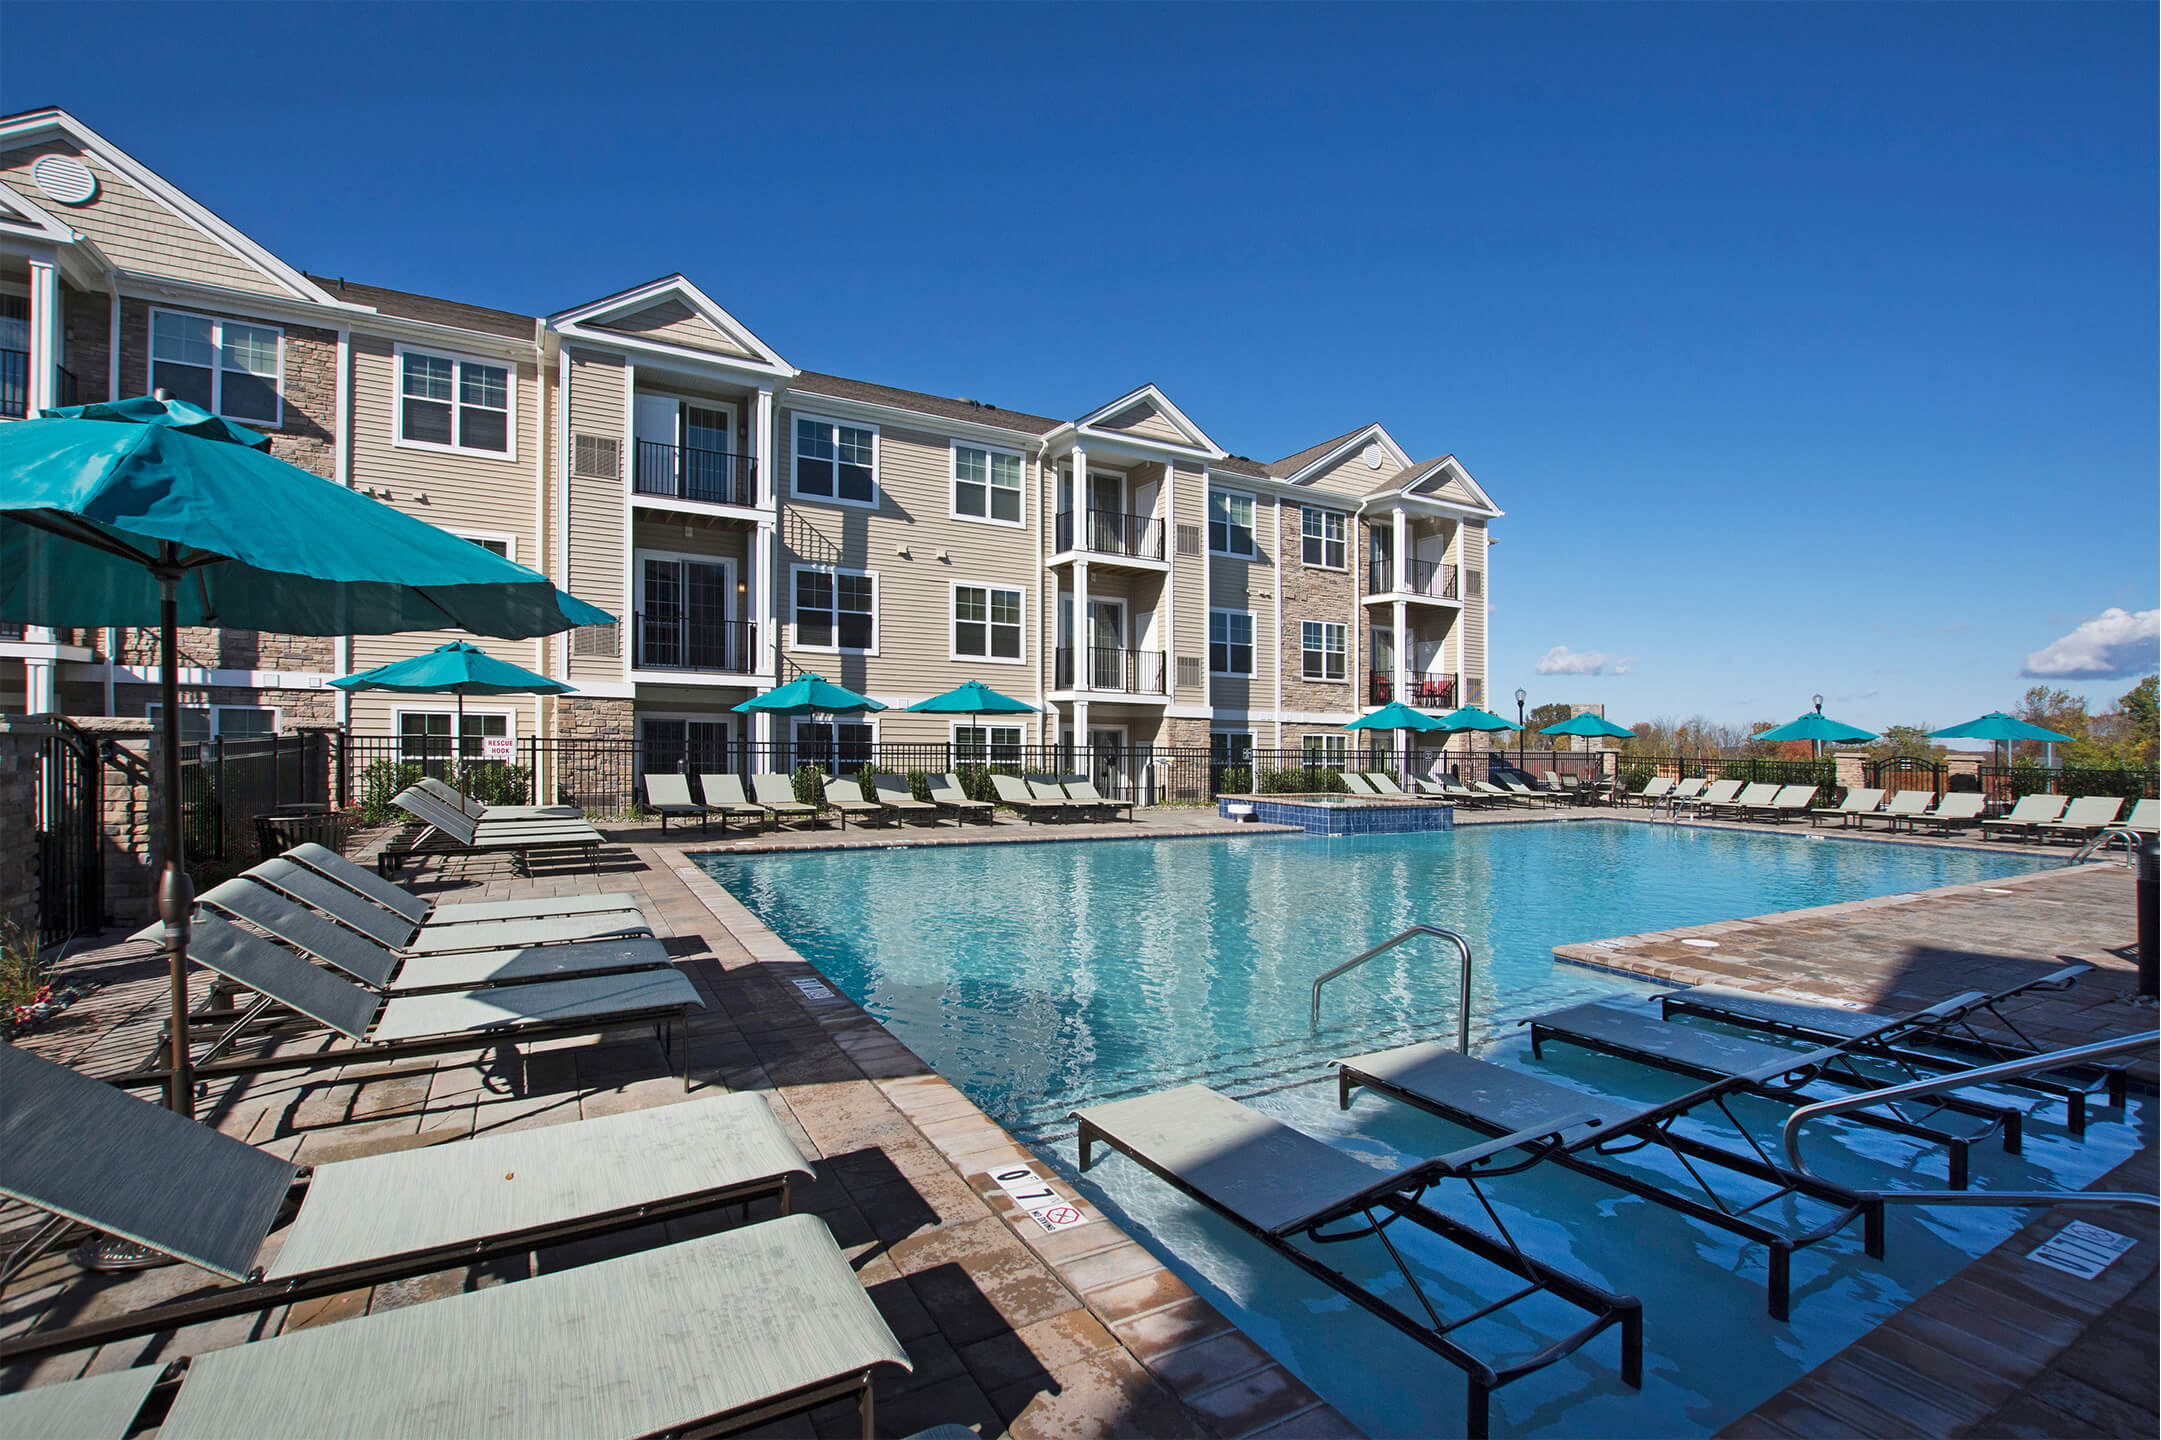 Outdoor poolside seating with umbrella at Parc at Roxbury, Roxbury Township, New Jersey